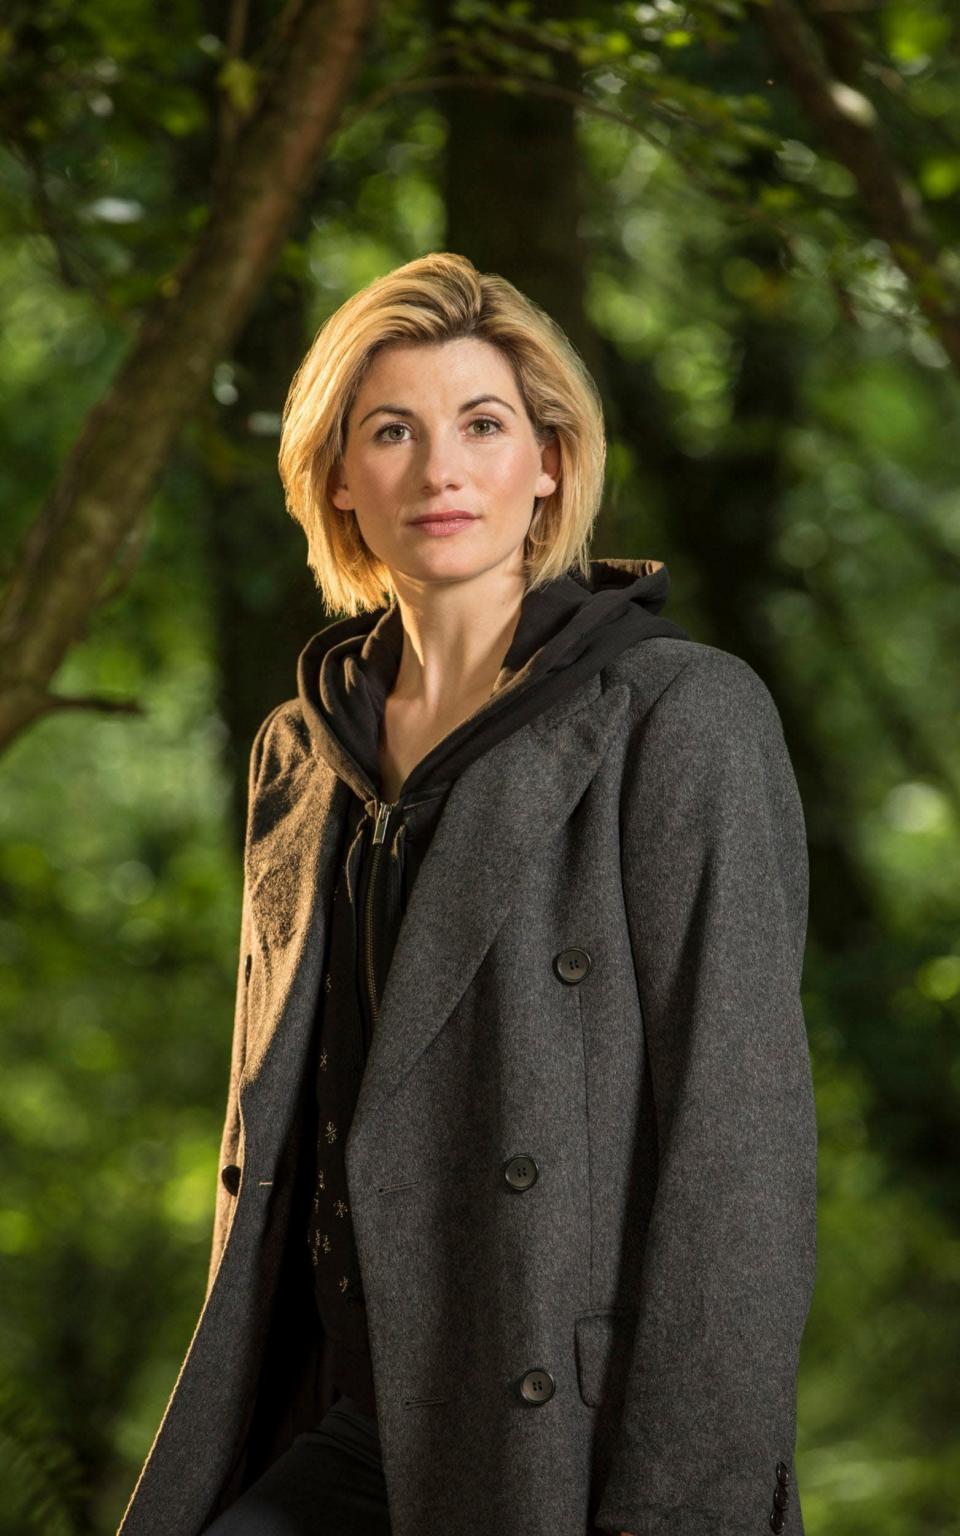 Jodie Whittaker’s transition into becoming a female Doctor is easy because he’s asexual and not defined by inherently manly traits (BBC)